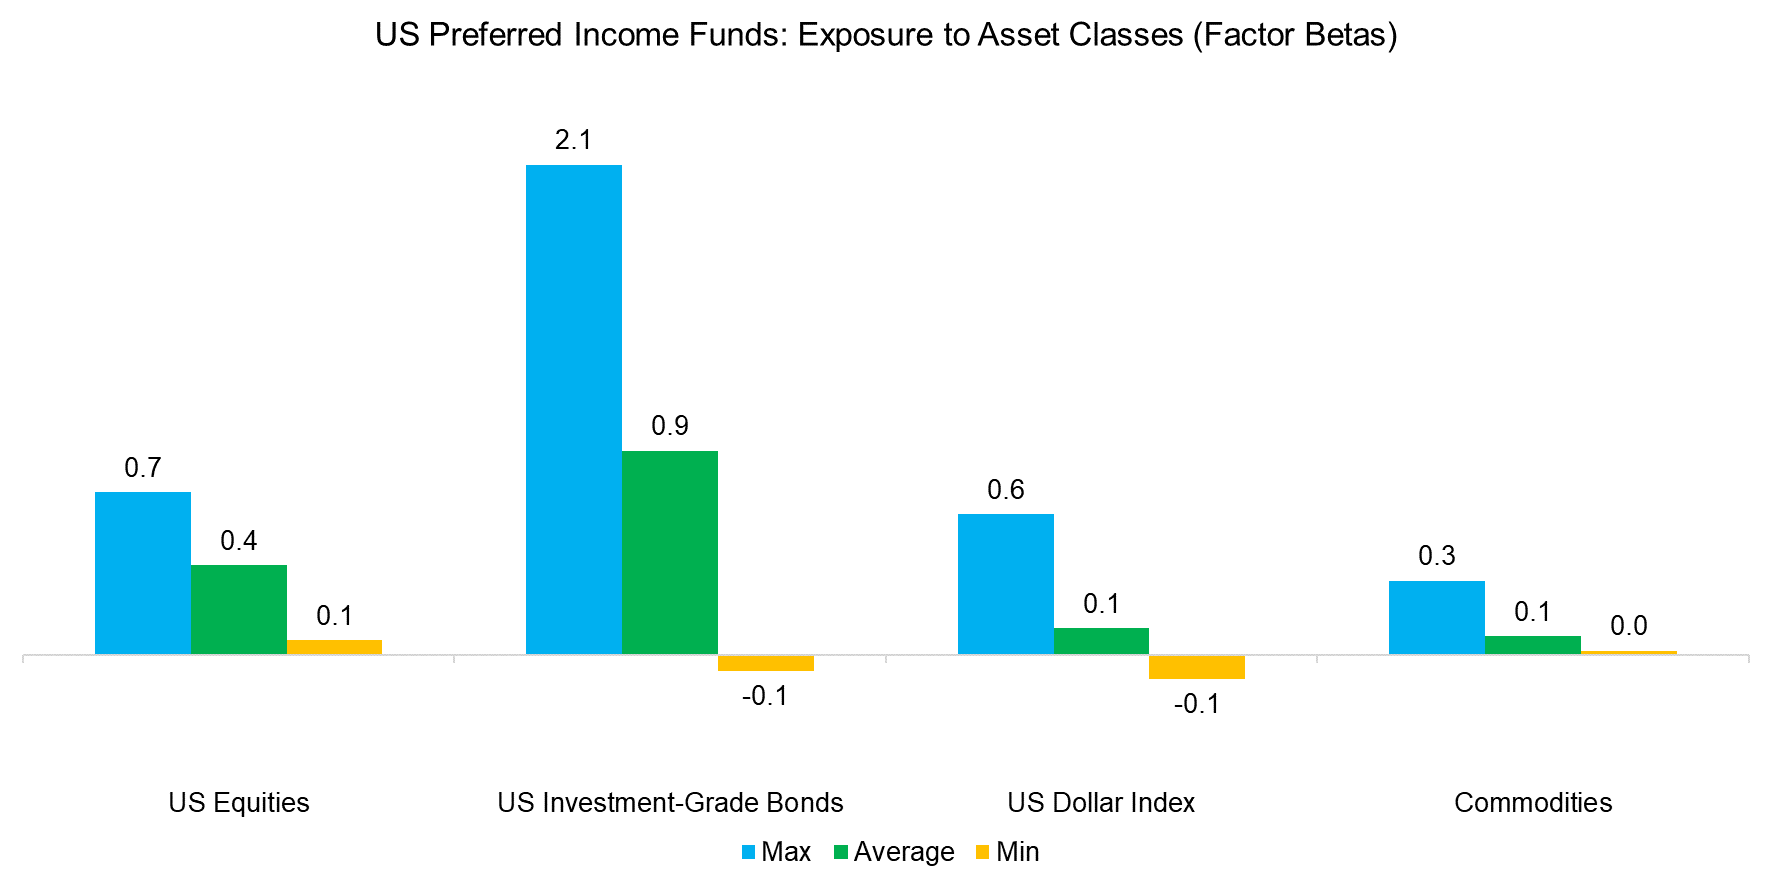 US Preferred Income Funds Exposure to Asset Classes (Factor Betas)